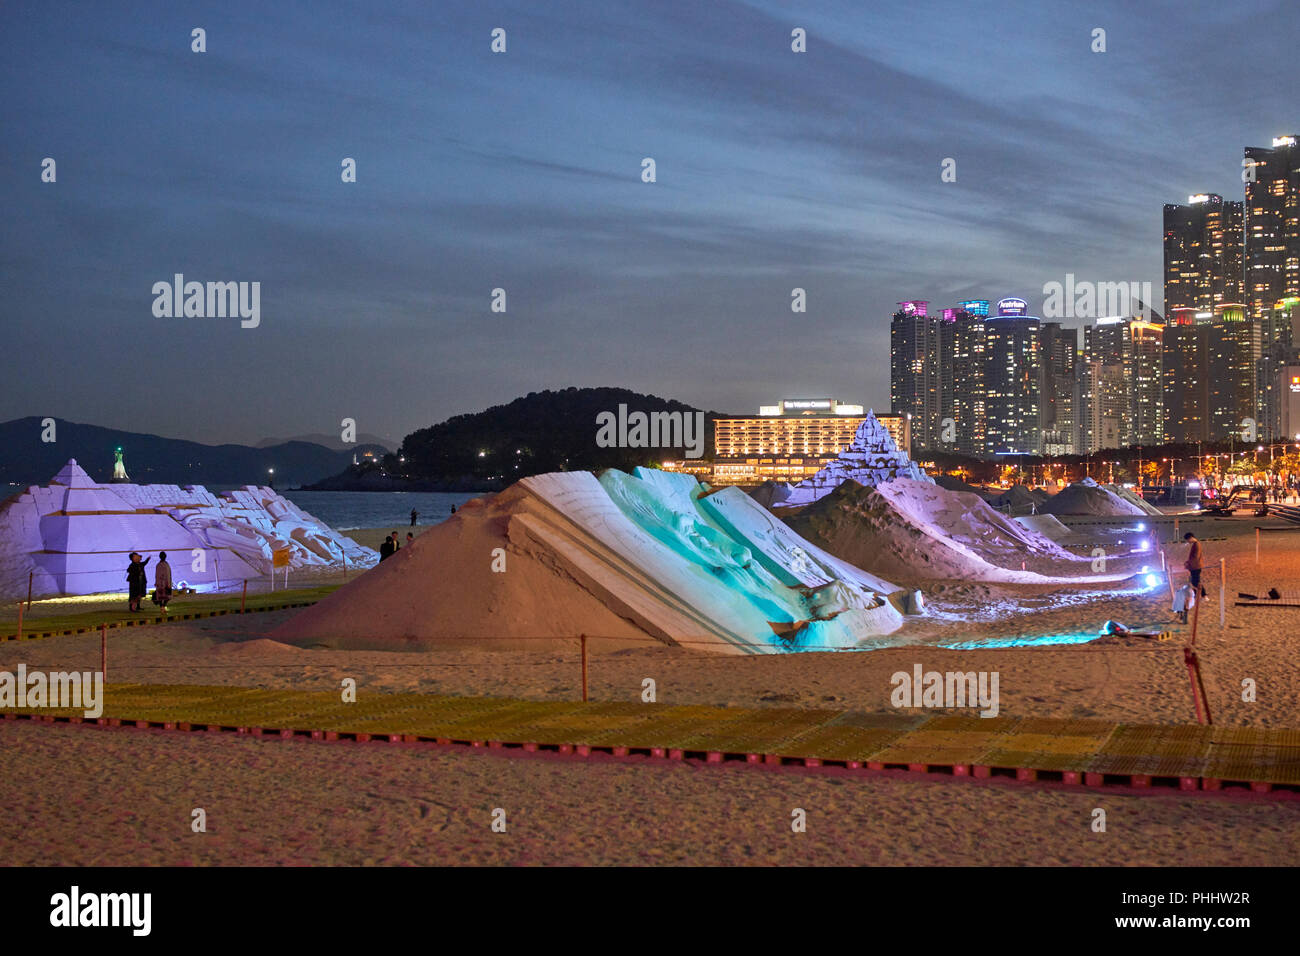 Haeundae Sand Festival 2018, Busan, Korea. Sculptures lit at twighlight with bay, Dongbaek Park and skyscrapers in background; lighthouse Stock Photo